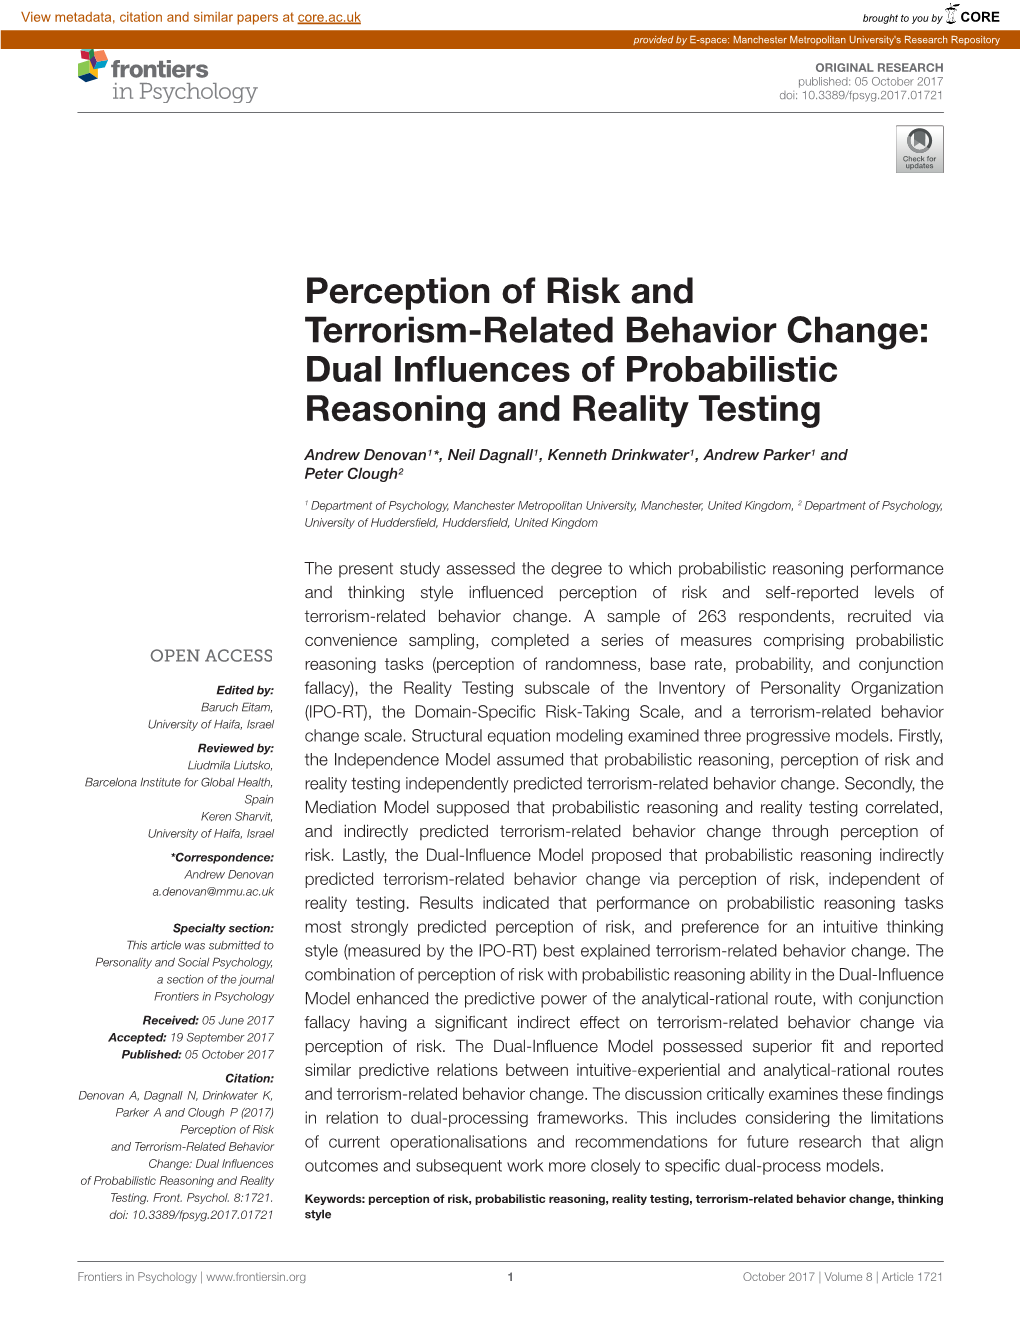 Perception of Risk and Terrorism-Related Behavior Change: Dual Inﬂuences of Probabilistic Reasoning and Reality Testing